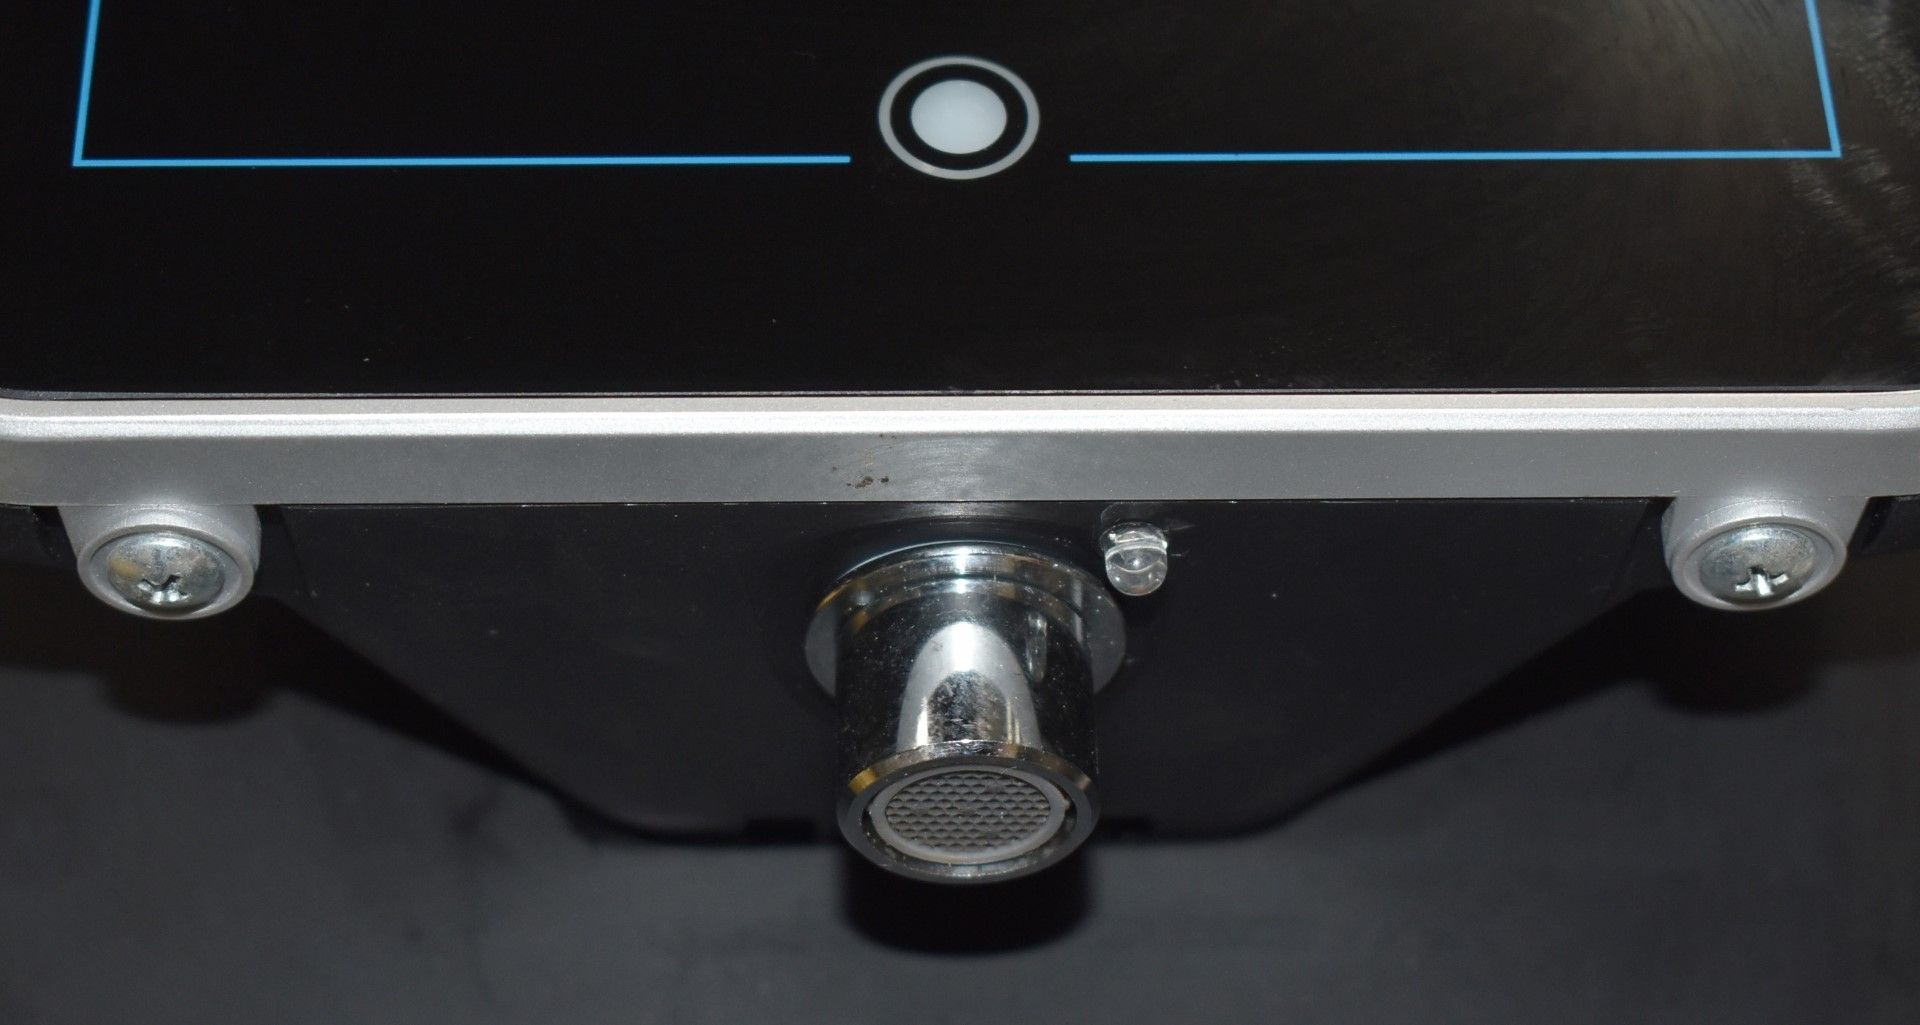 1 x Puretron Shark GA Hydrogen Countertop Filtered Water Dispenser - RRP £3,300 - Recently Removed - Image 17 of 17